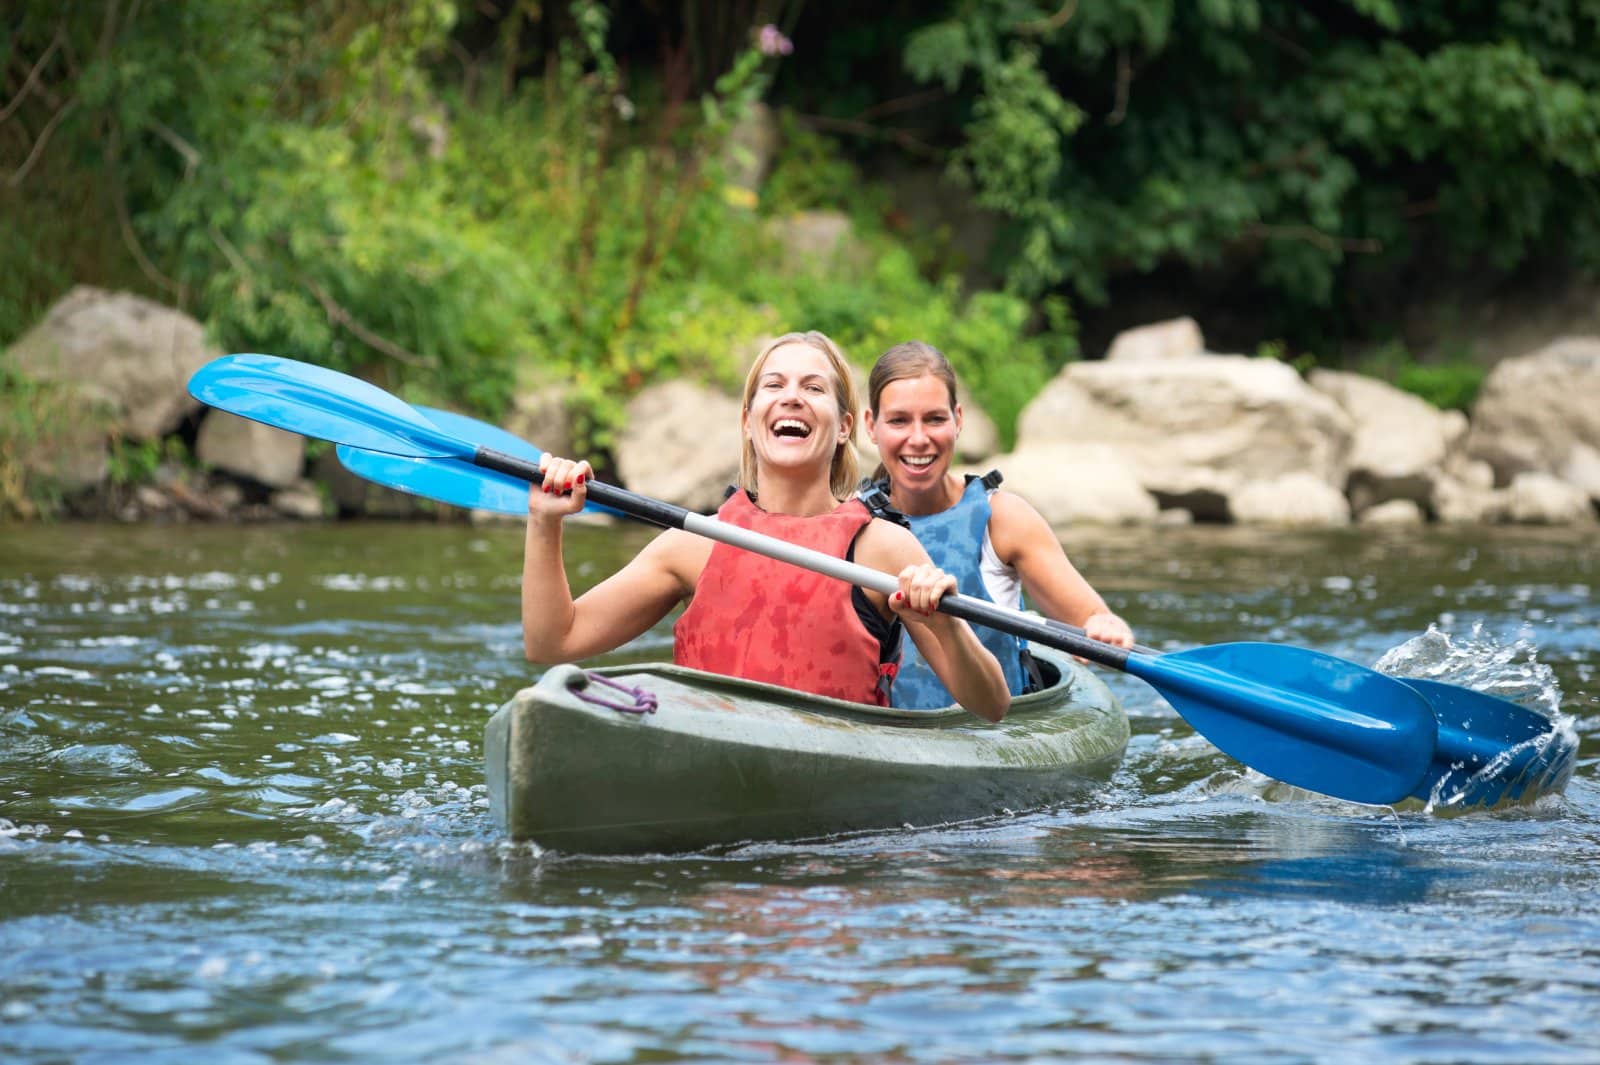 <p class="wp-caption-text">Image Credit: Shutterstock / Corepics VOF</p>  <p><span>Kayaking on the Napa River offers a unique vantage point from which to experience the beauty and tranquility of Napa Valley. This gentle river flows through the heart of Napa, providing a peaceful escape into nature. Guided tours are available, offering insights into the local ecosystem, history, and wine culture from the perspective of the water. Kayaking the Napa River is an activity that combines adventure with relaxation, appealing to both seasoned paddlers and beginners looking for a new way to explore Napa Valley.</span></p>